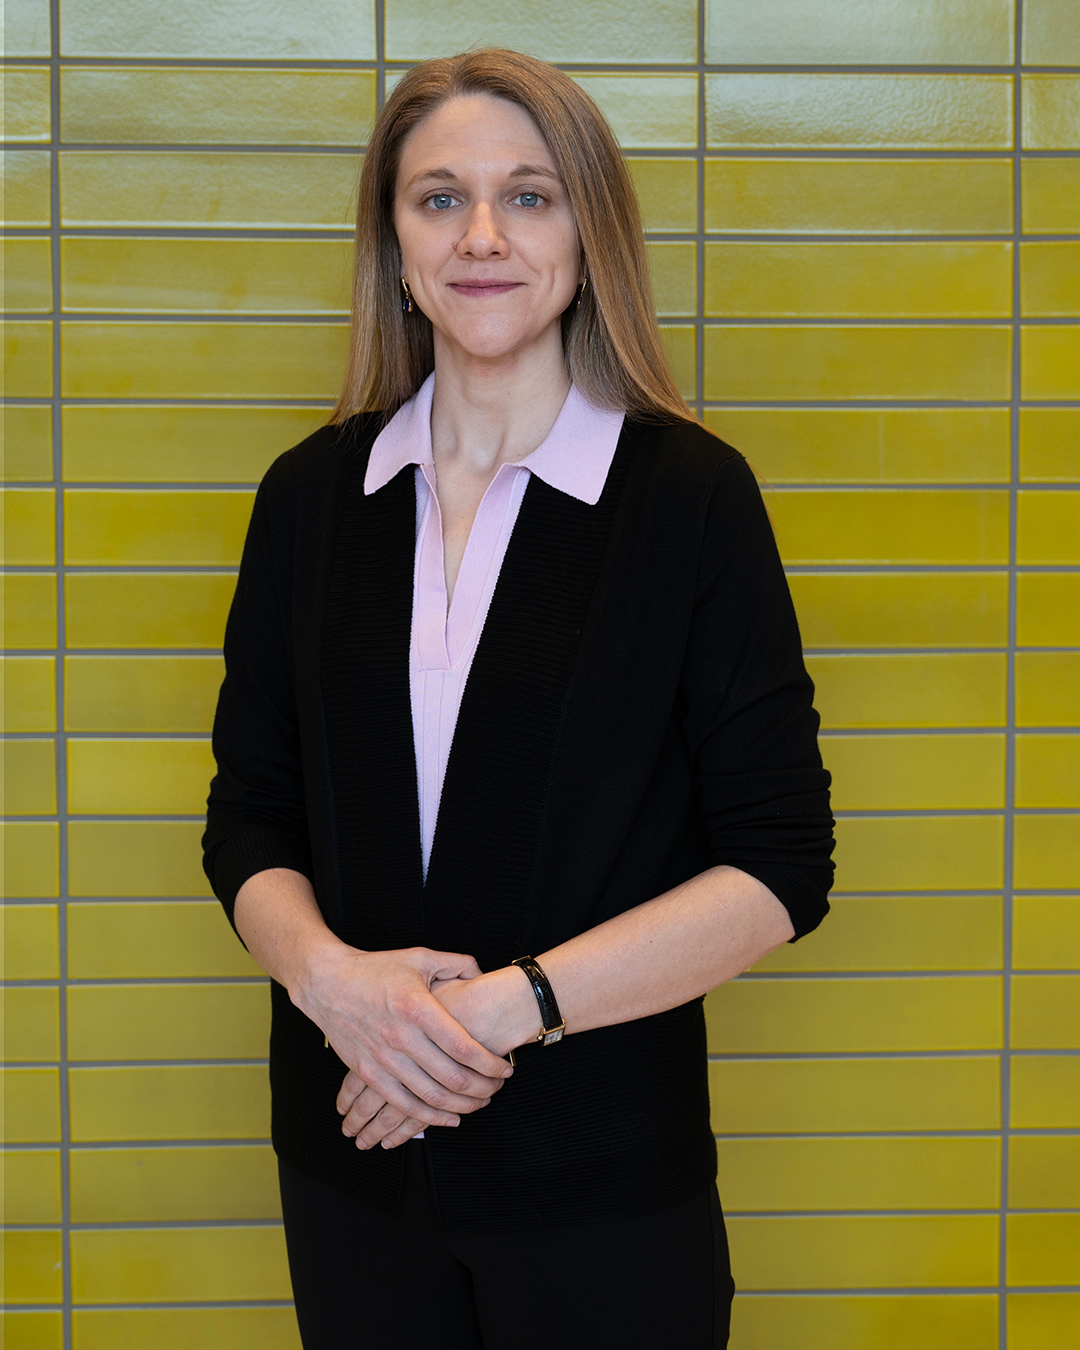 Olivia Goosen standing in front of yellow tiled wall, wearing black suit